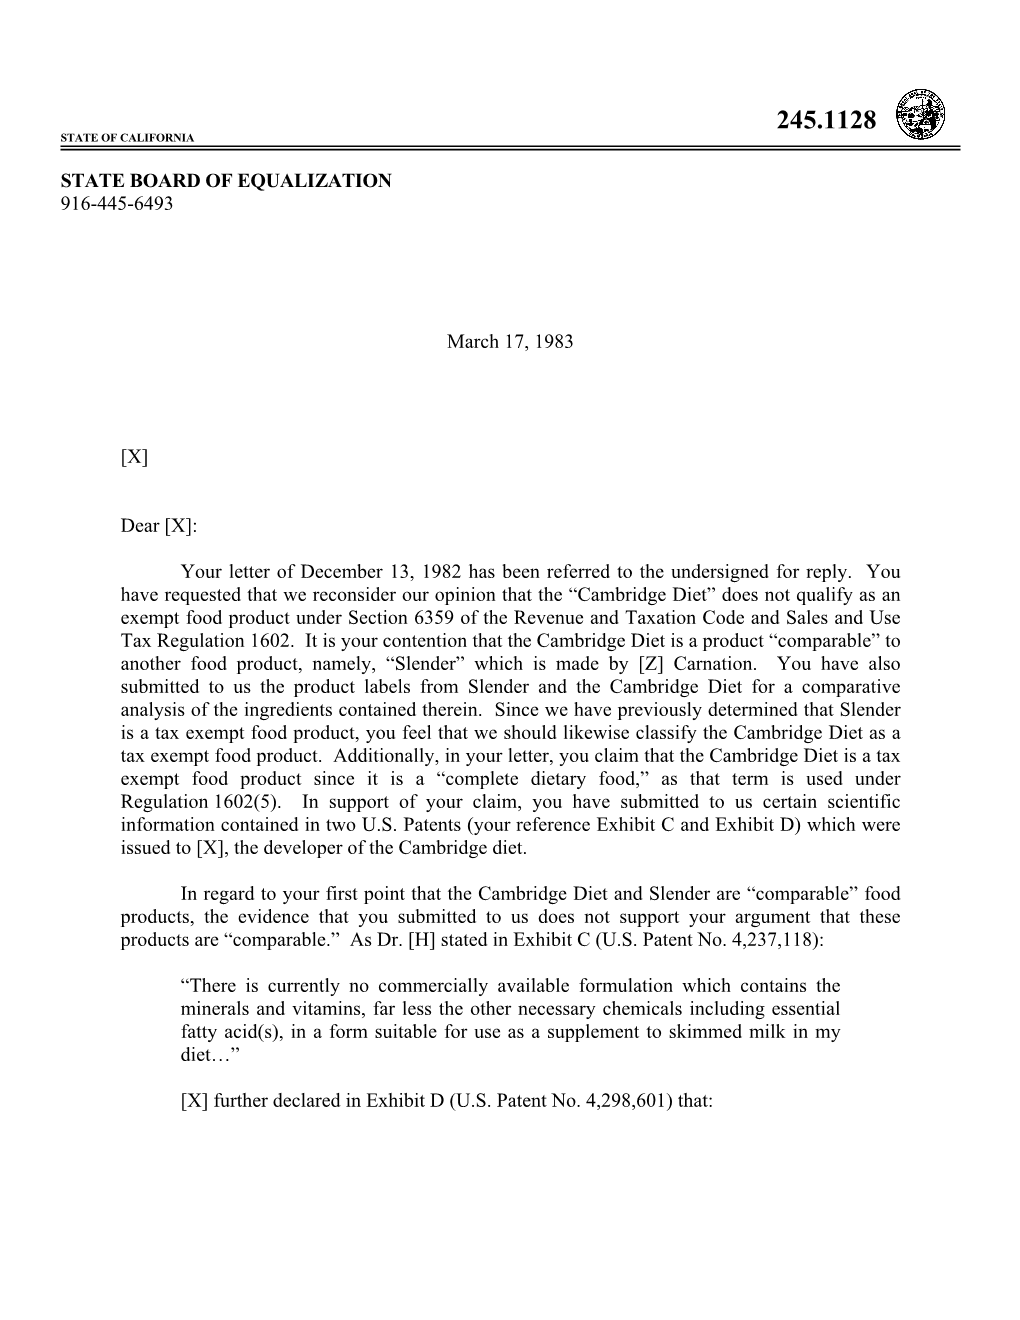 Your Letter of December 13, 1982 Has Been Referred to the Undersigned for Reply